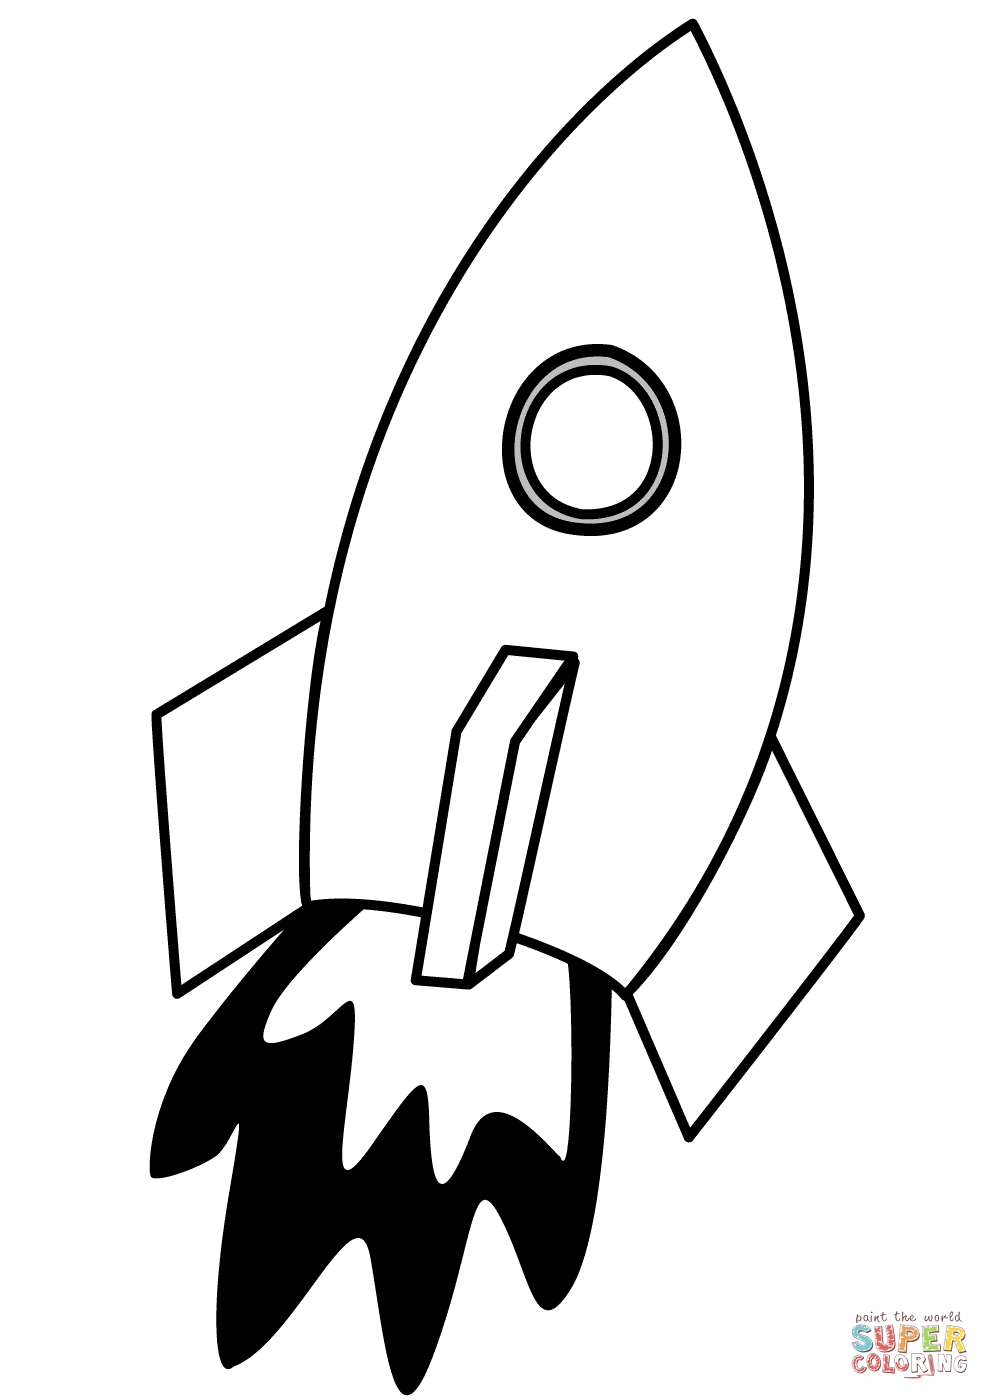 Rocketship coloring page | Free Printable Coloring Pages